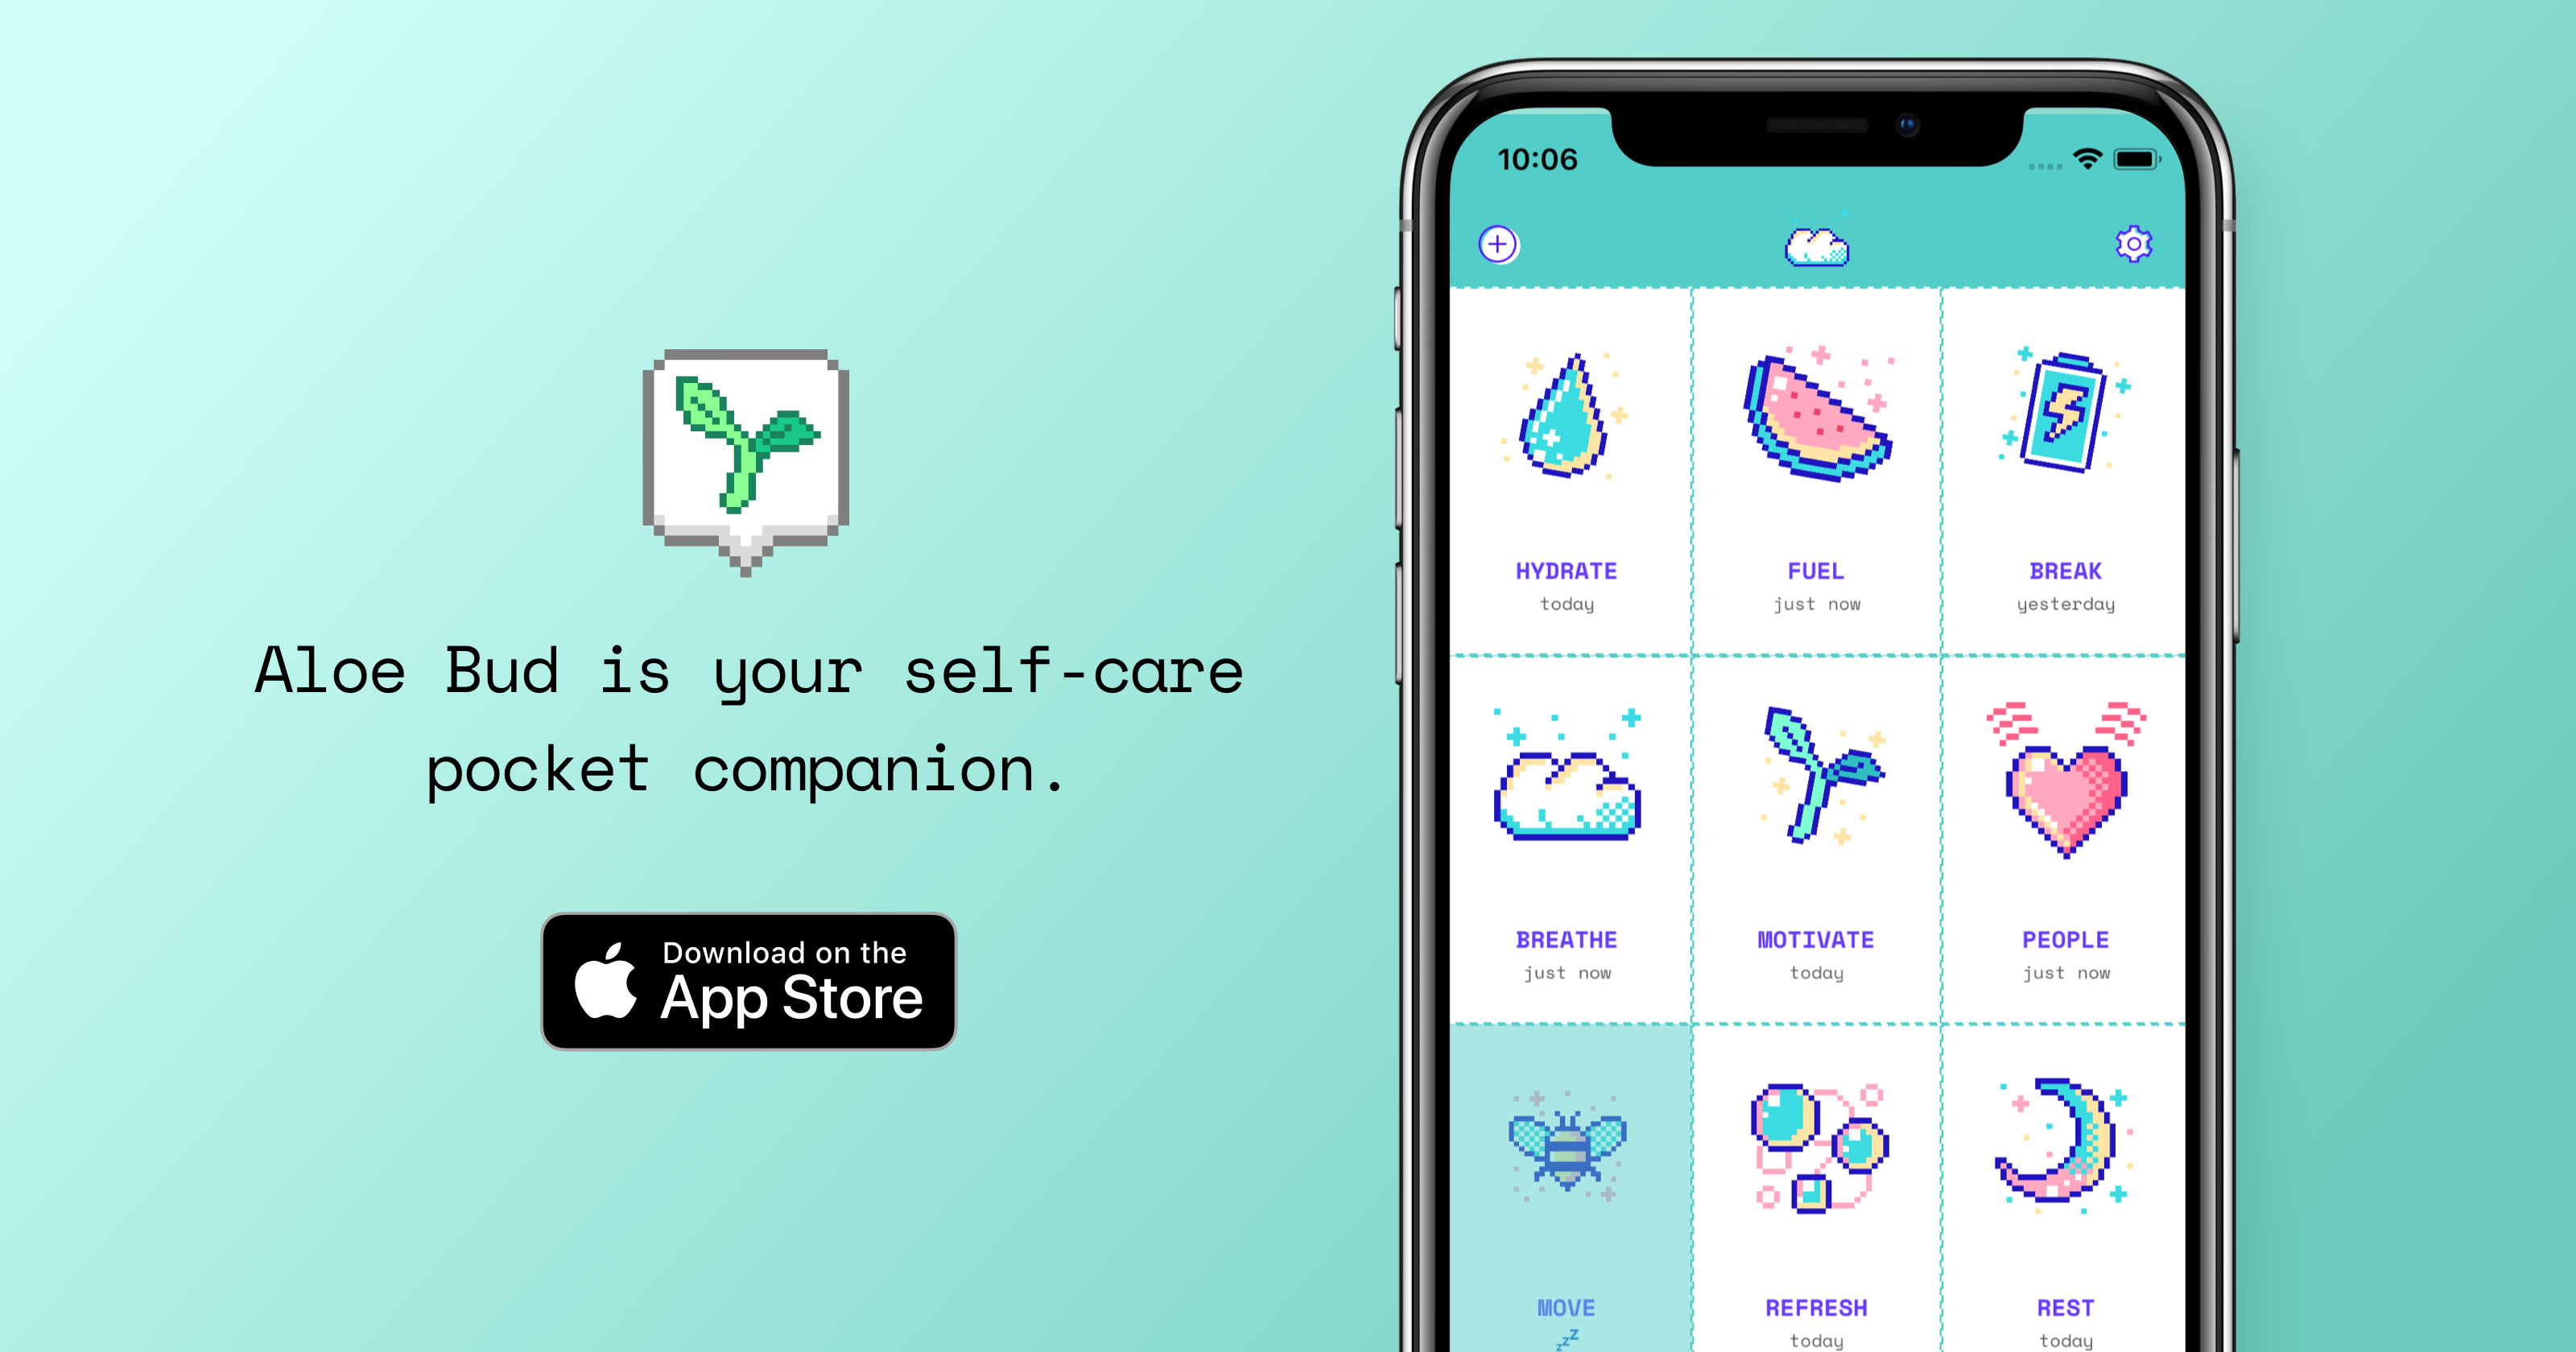 App Store artwork featuring Aloe Bud, a self-care pocket companion, with text saying "Aloe Bud is your self-care pocket companion" and a badge that says "Download on the App Store."